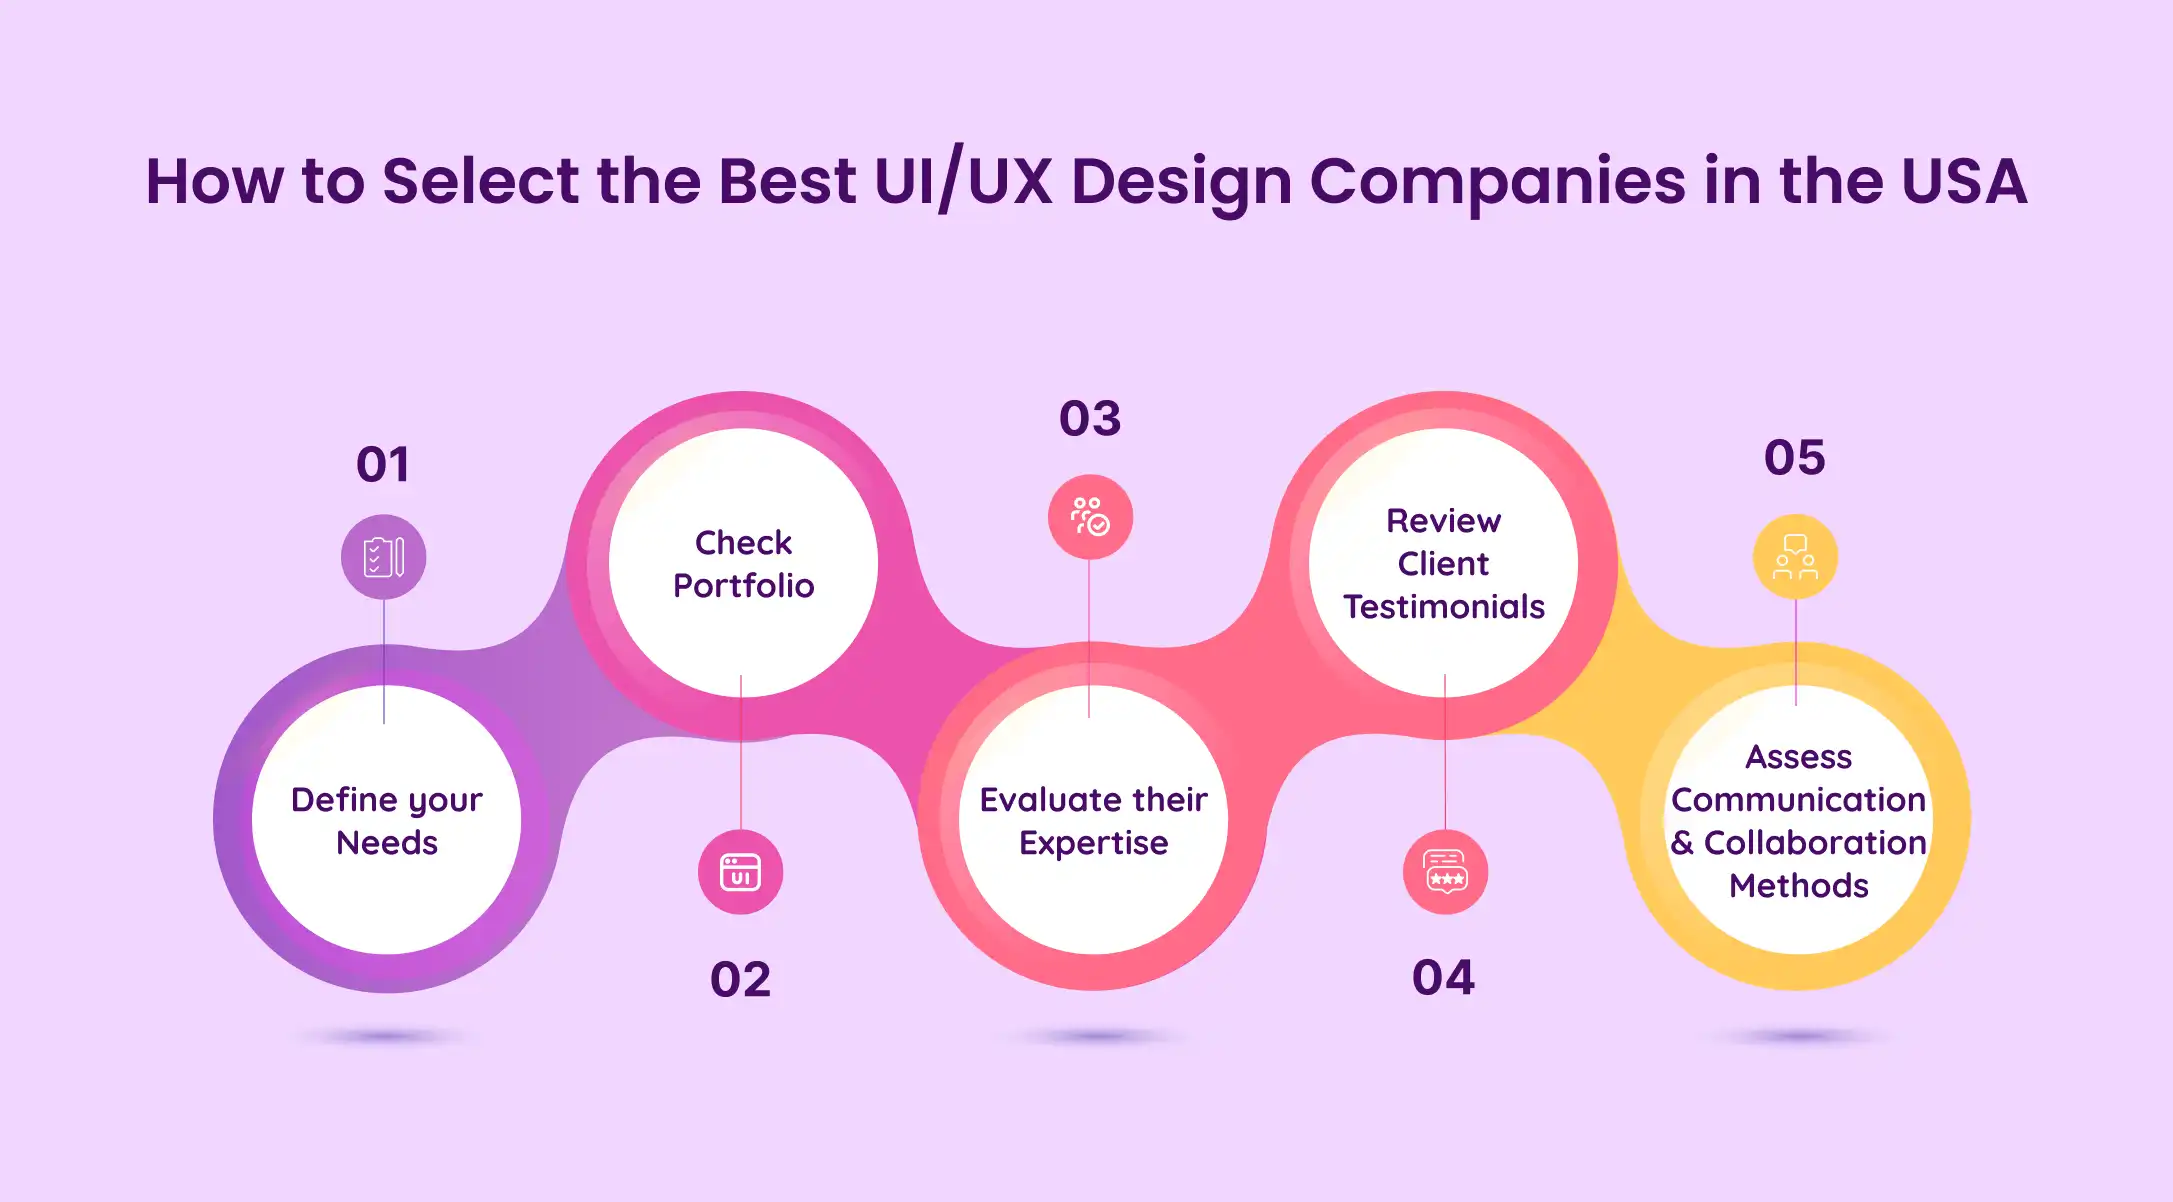 How to Select the Best UI/UX Design Companies in the USA?